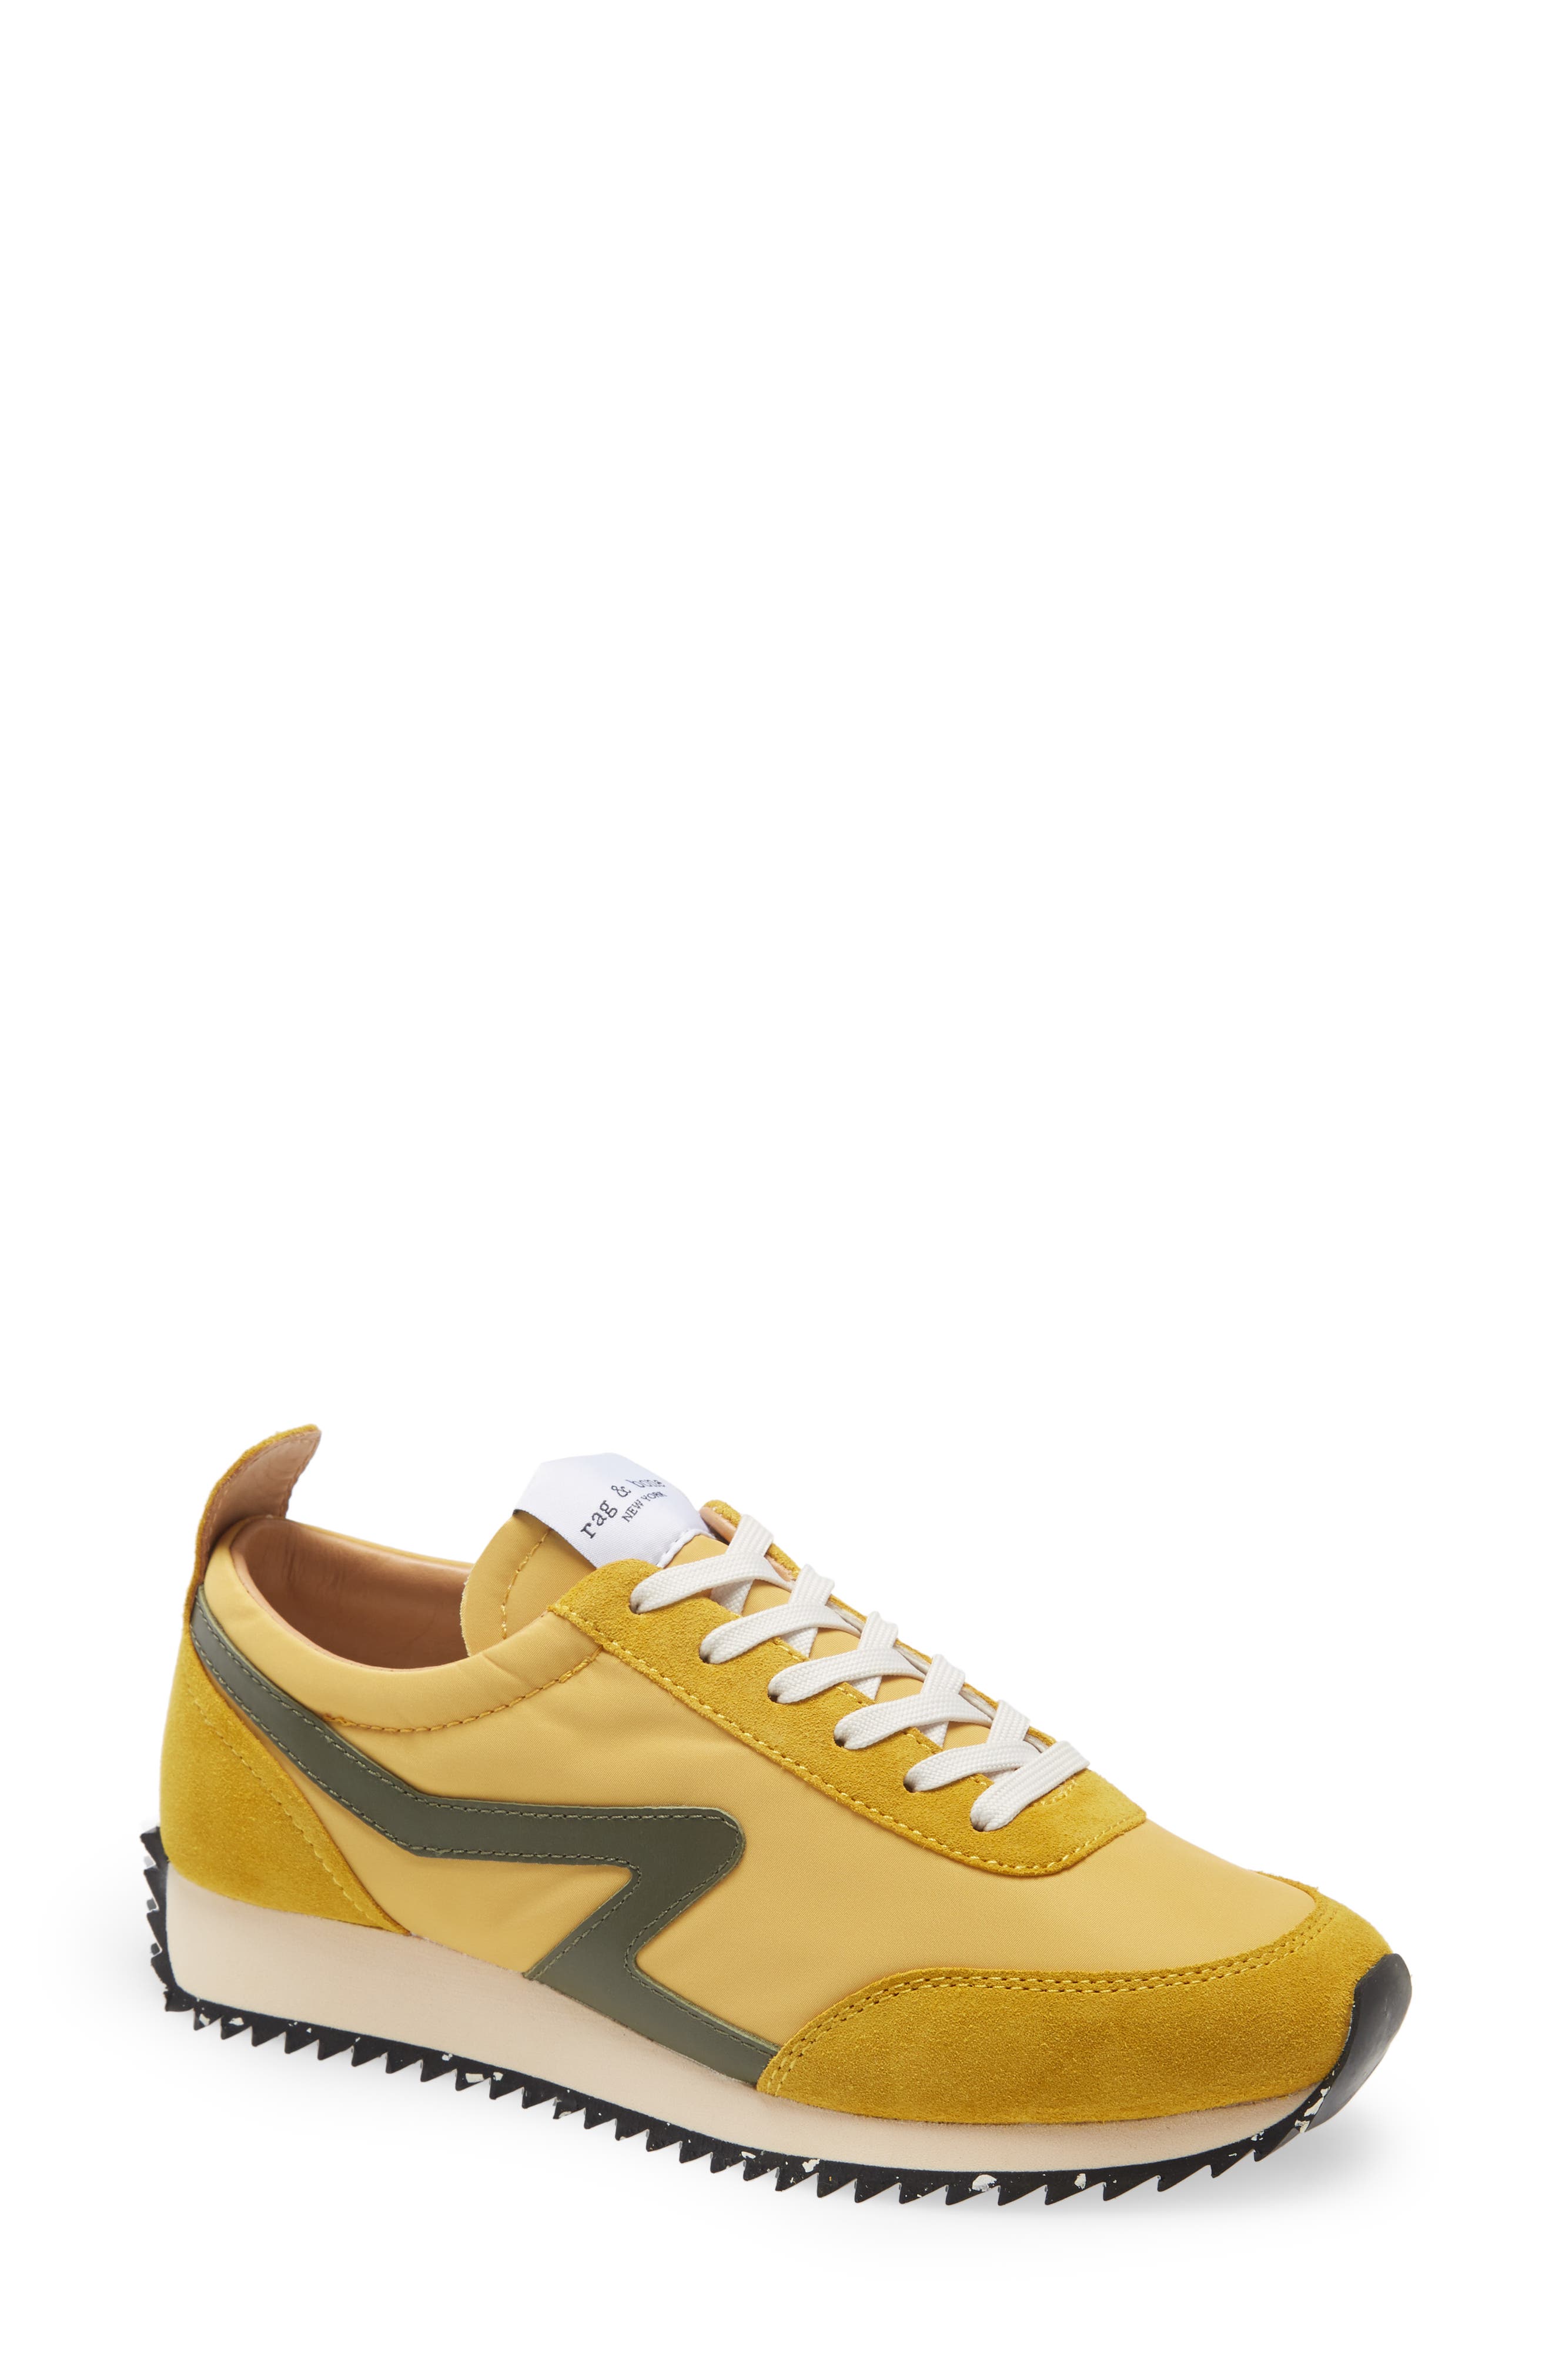 nordstrom tennis shoes